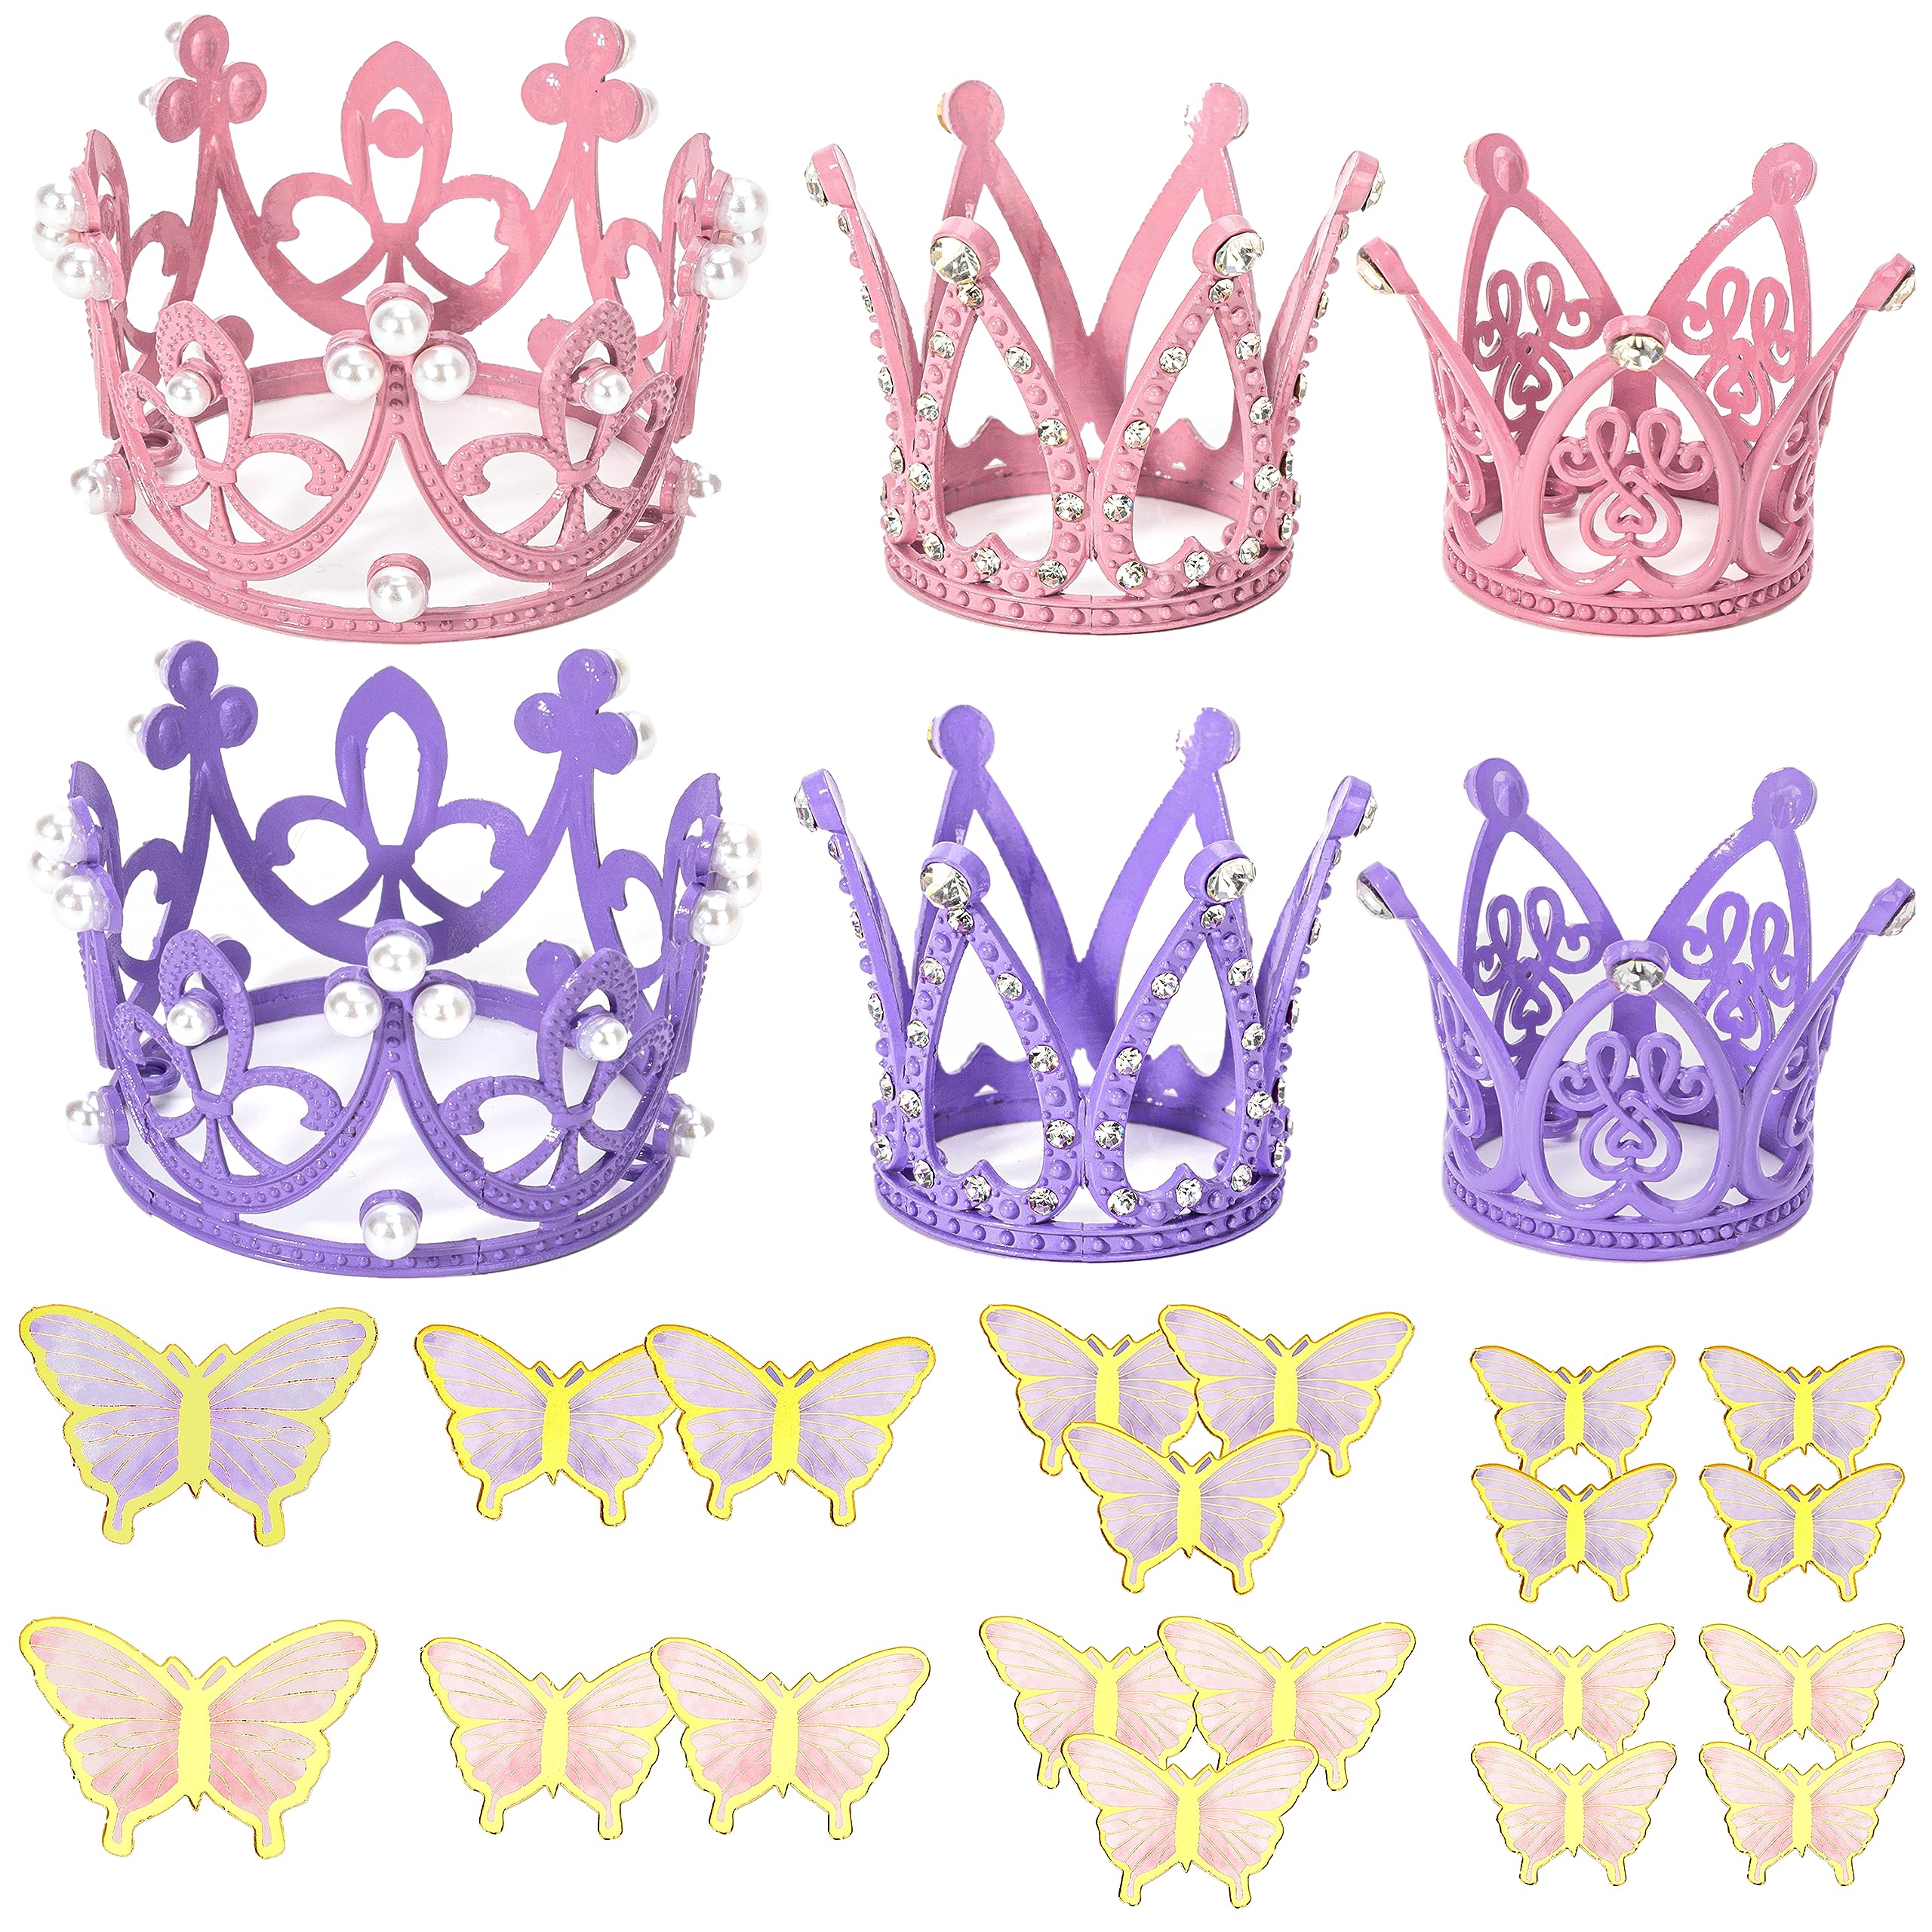  Ayfjovs 16 PCS Crown Cake Topper Mini Baby Crown Tiny Crown  with 48 PCS Butterfly Wall Decors for Cake Topper Coronas Para Decors Tiara  Crown for Women Girl Crown for Flower